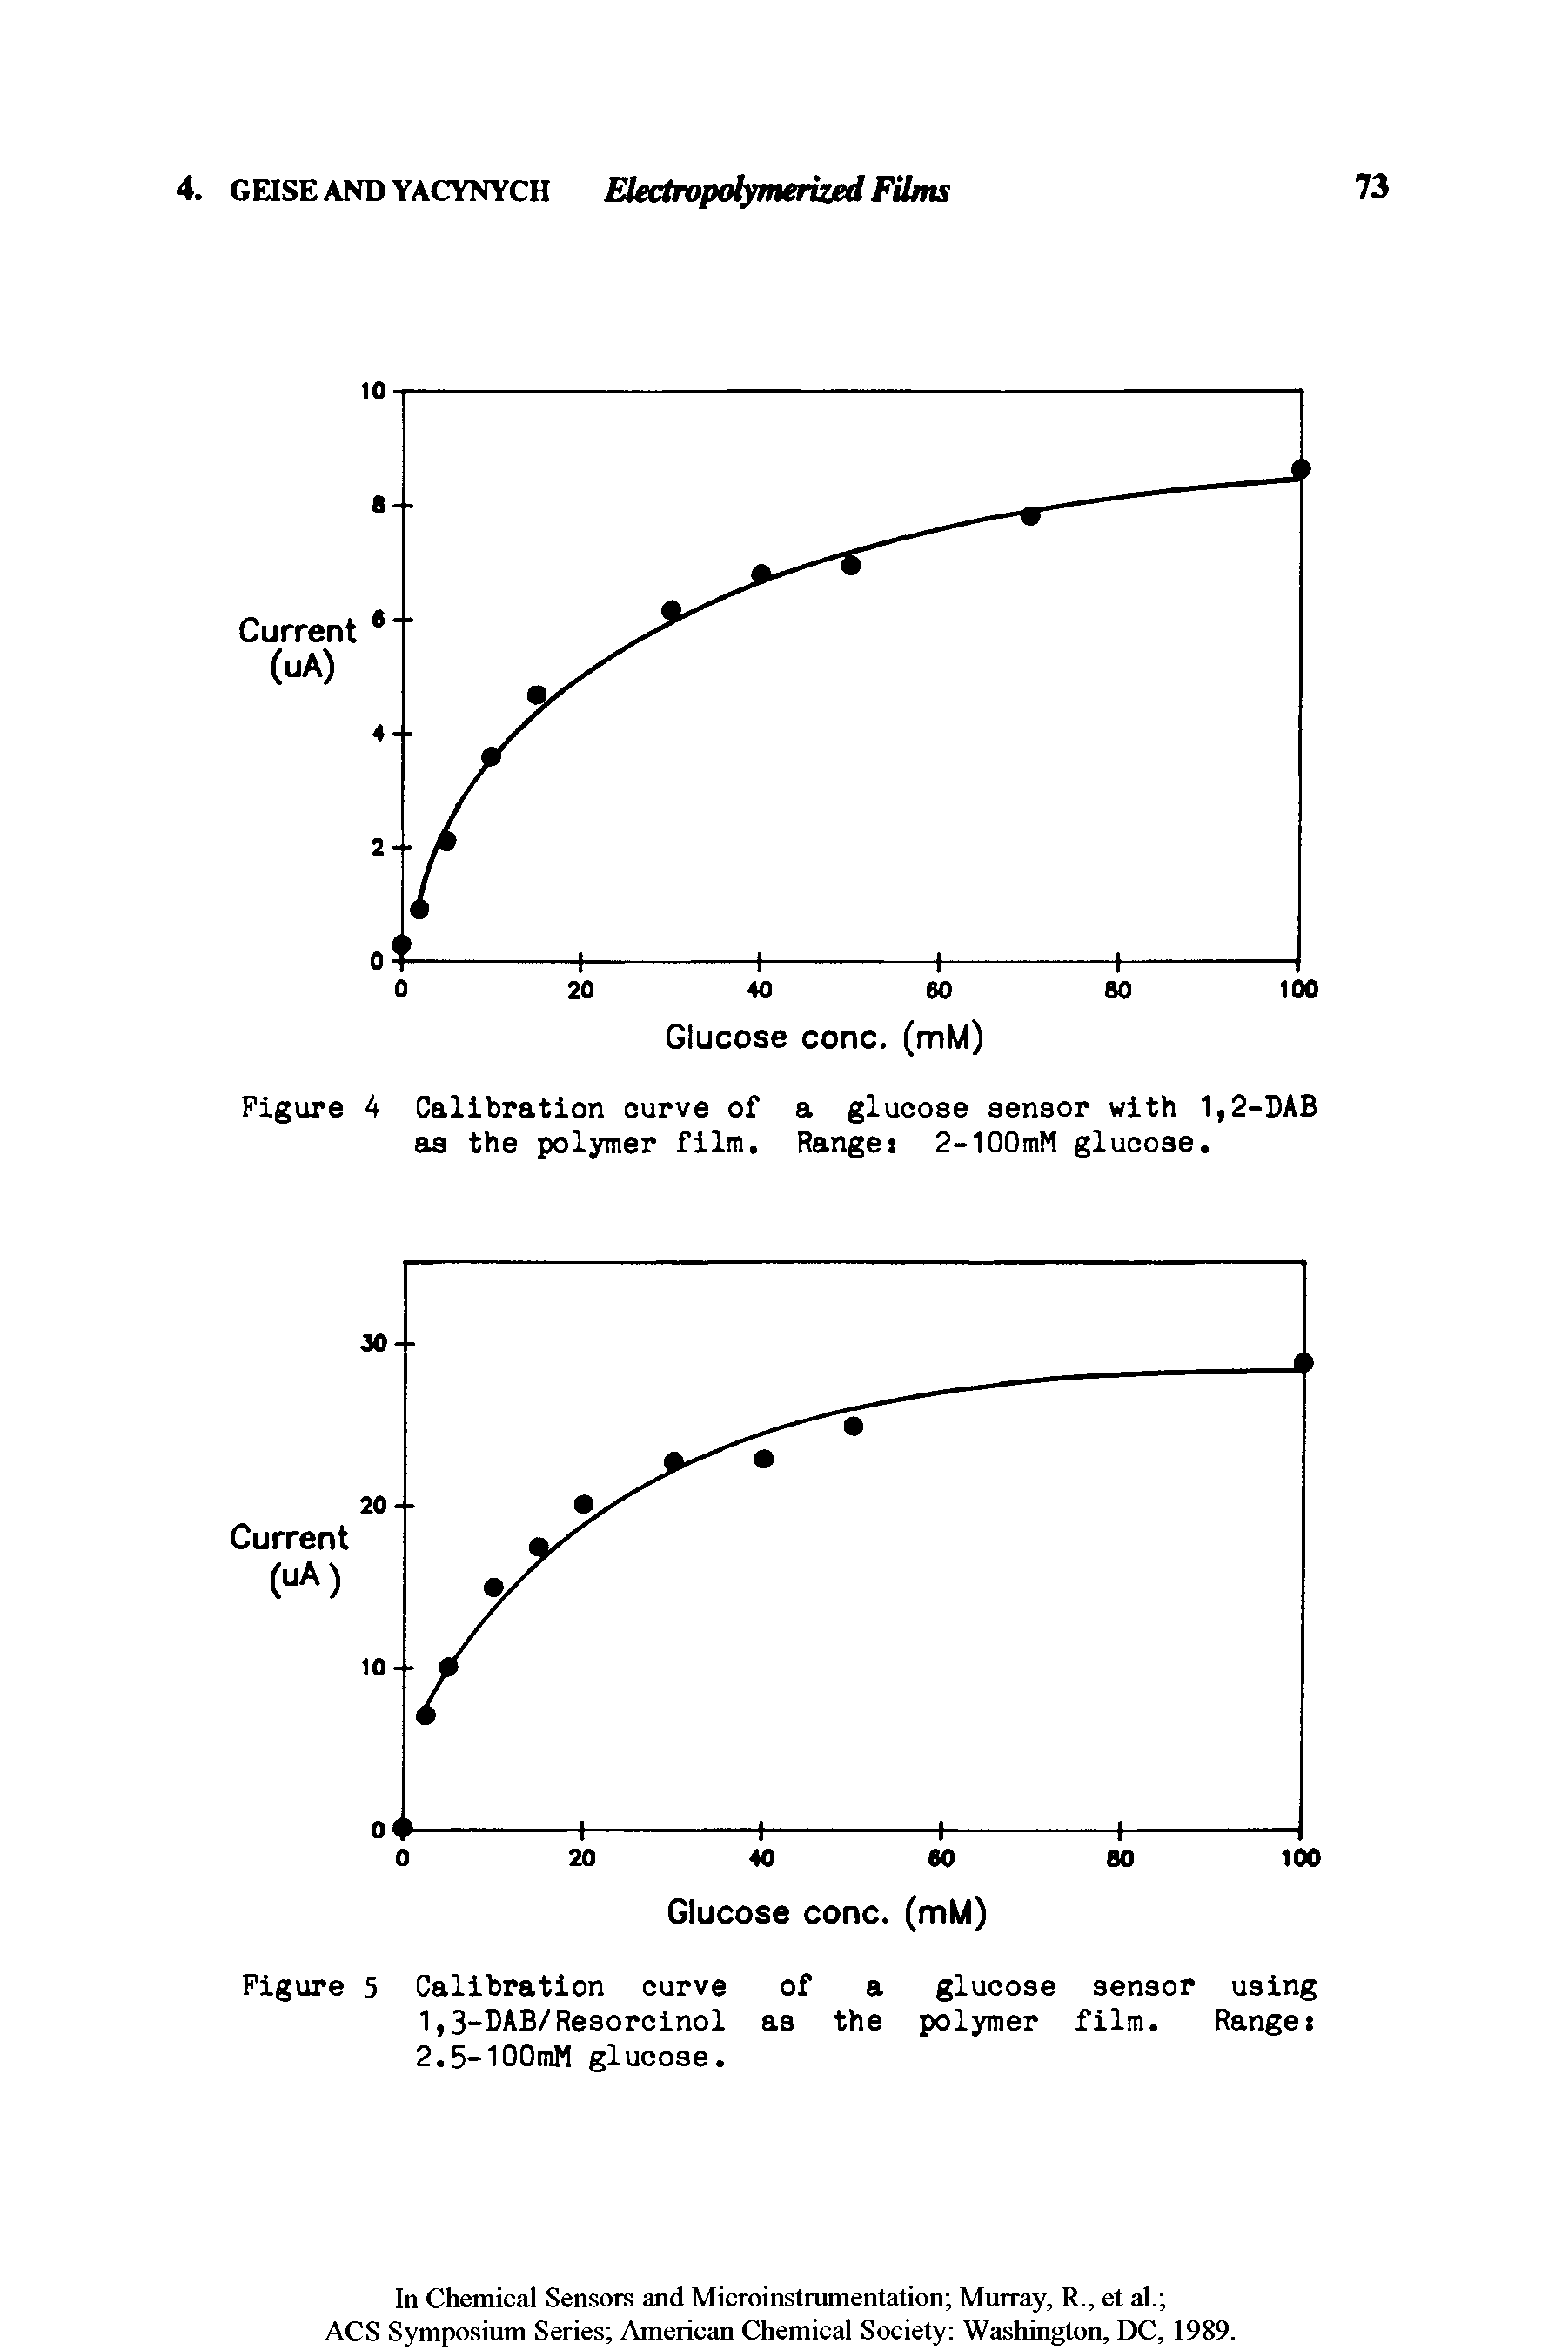 Figure 4 Calibration curve of a glucose sensor with 1,2-DAB as the polymer film. Range 2-100mM glucose.